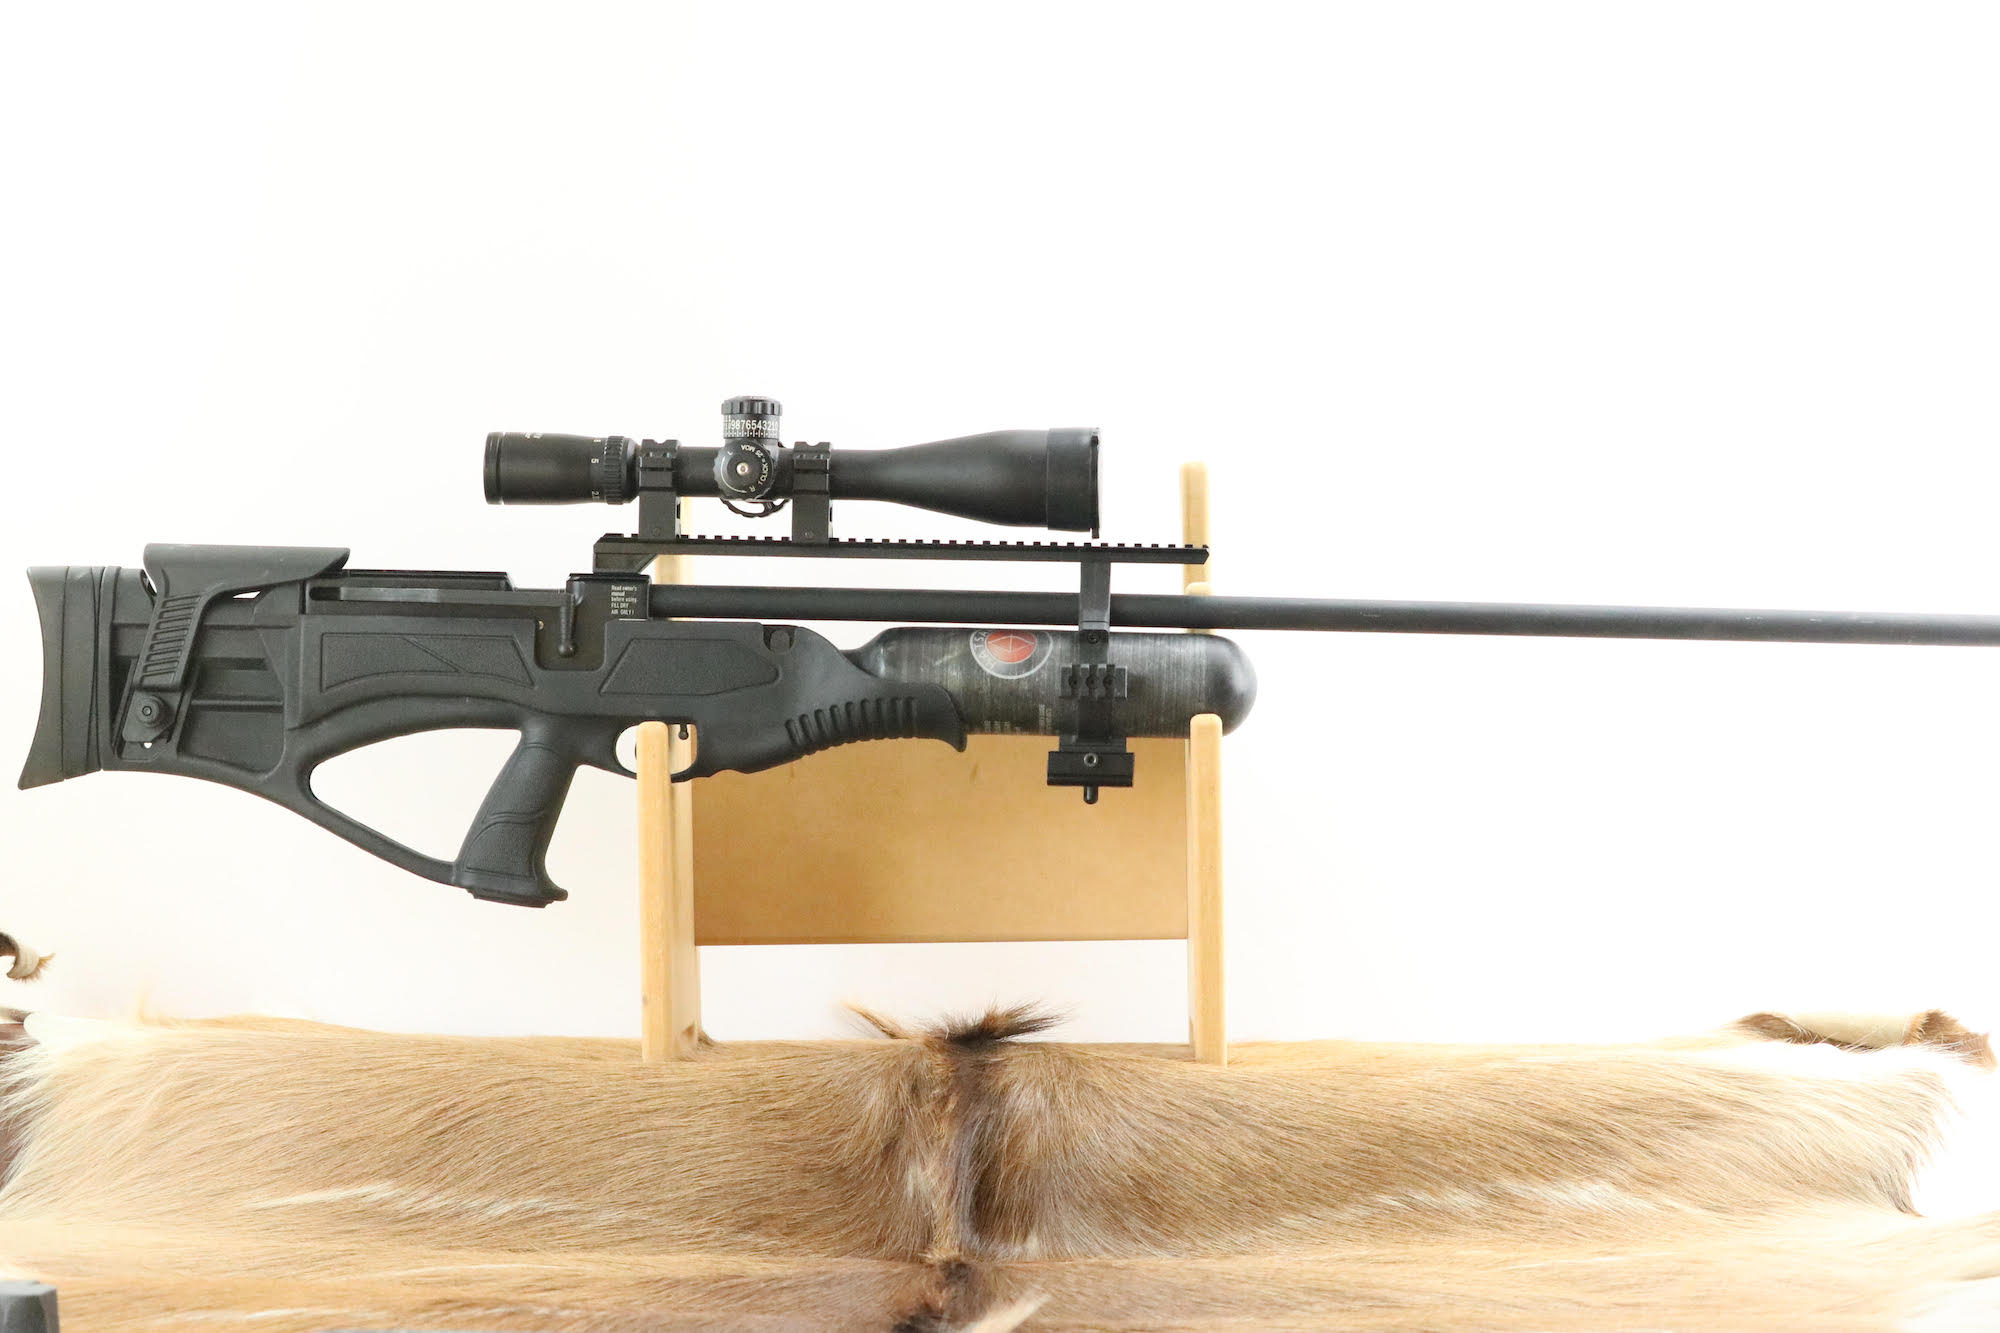 The Hatsan PileDriver is our pick for best air rifle.